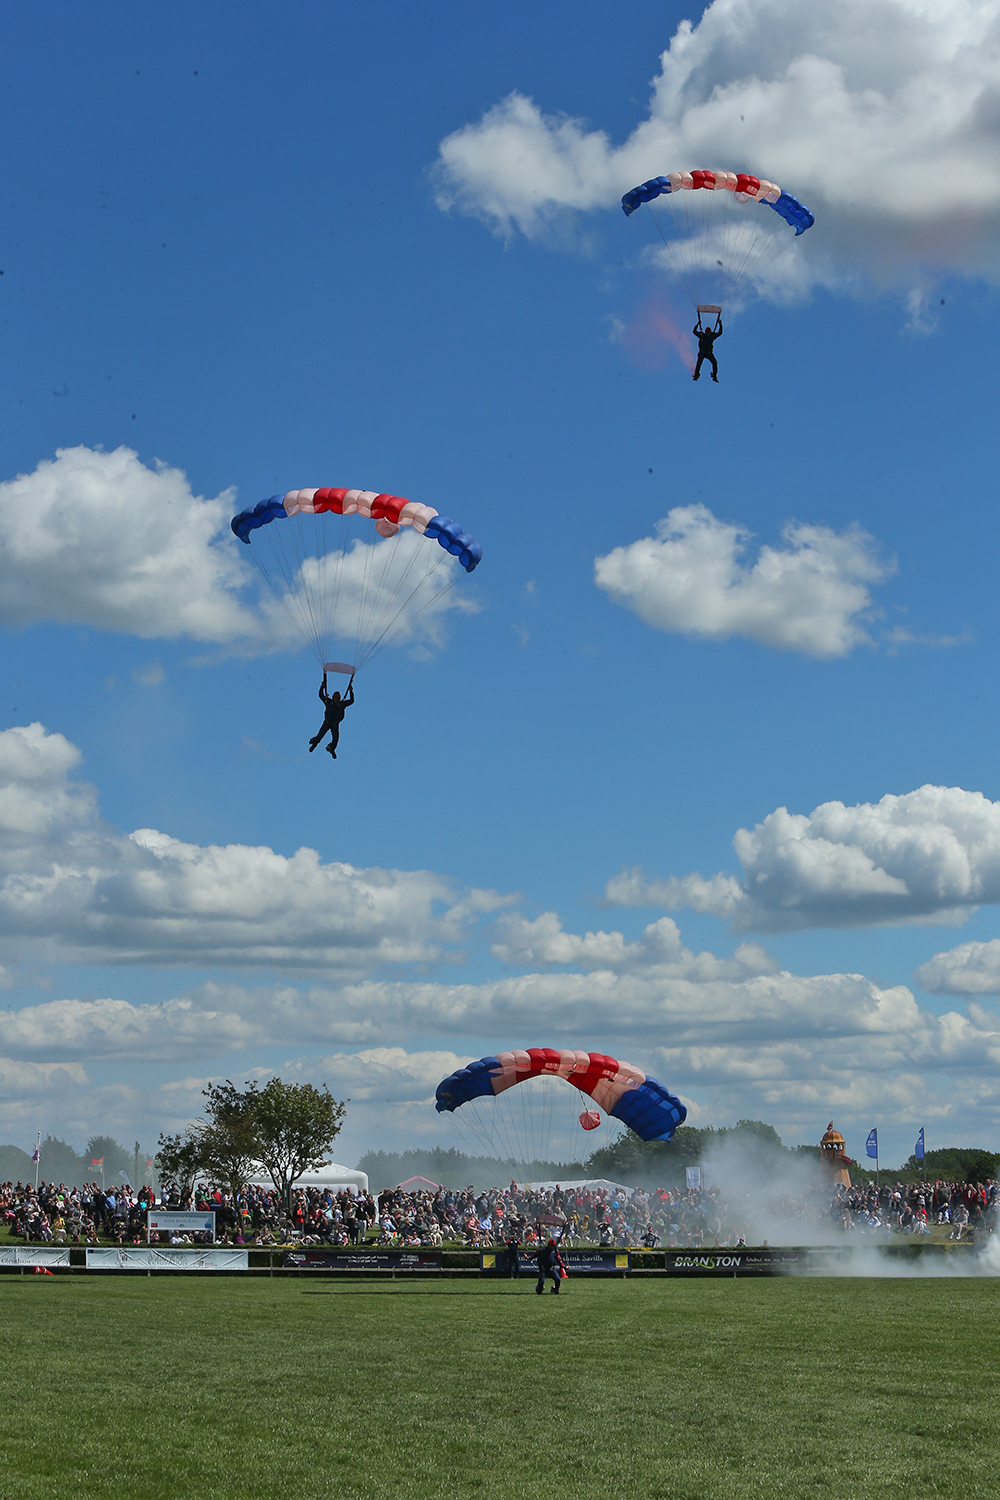 The Parachutists land with thousands gathered around the main ring